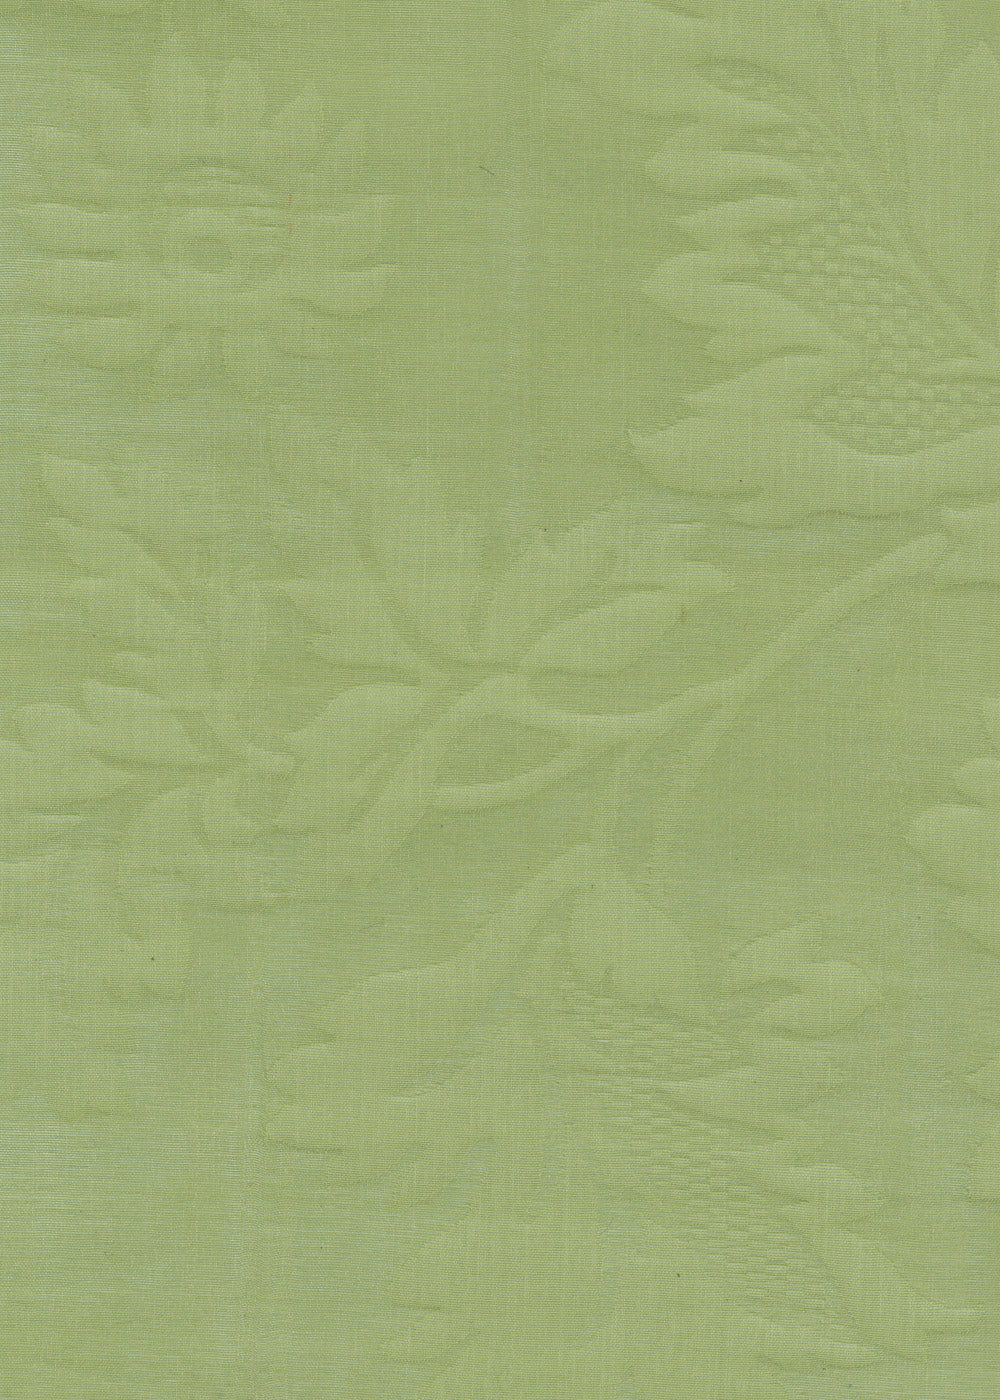 spring green woven damask fabric for drapery